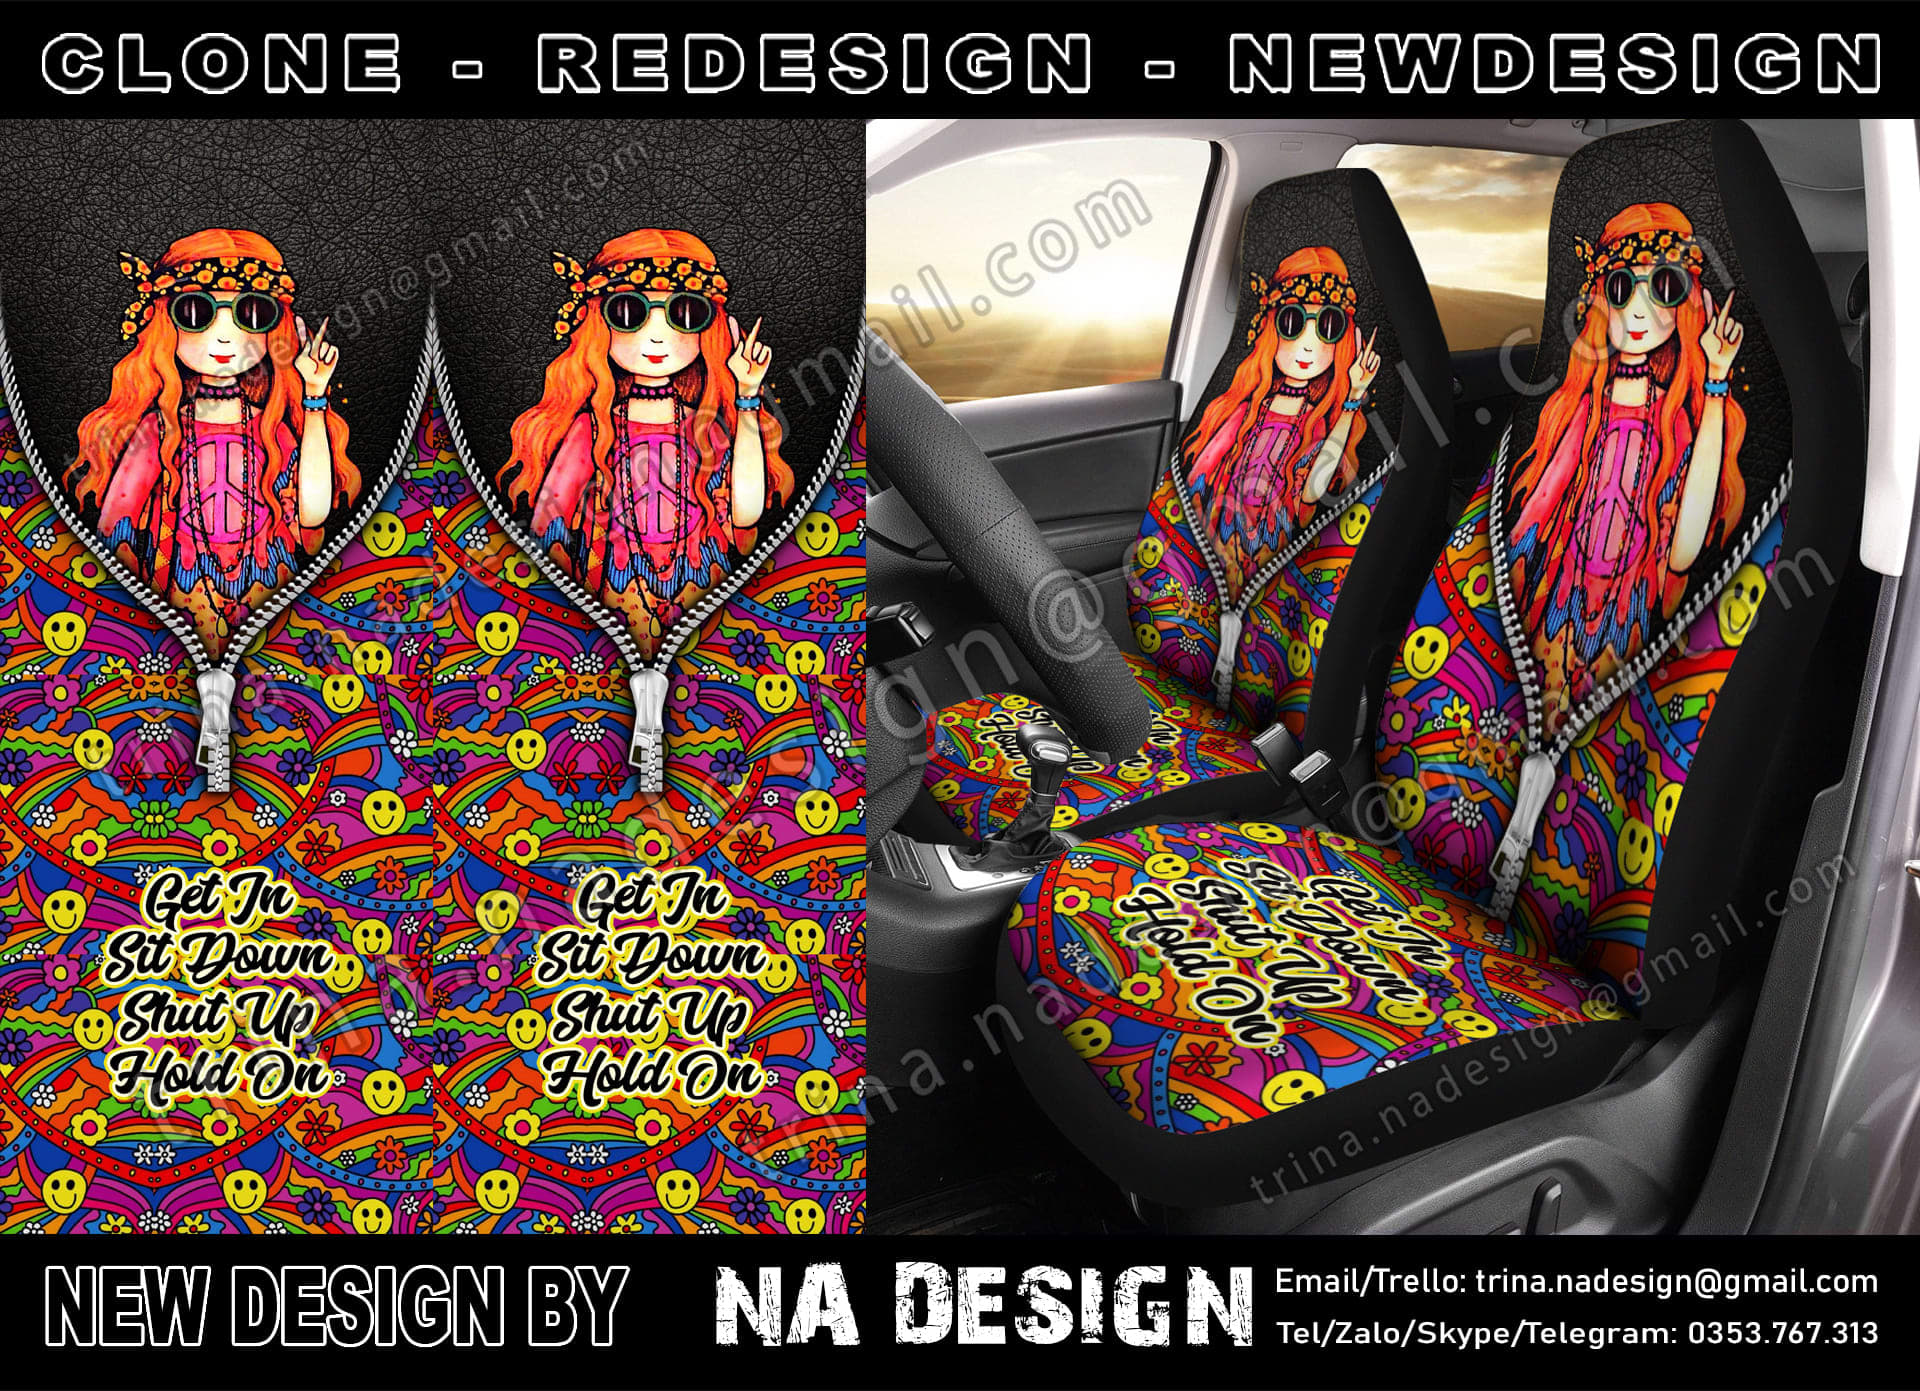 Print On Demand Front Car Seat Cover - Merchize